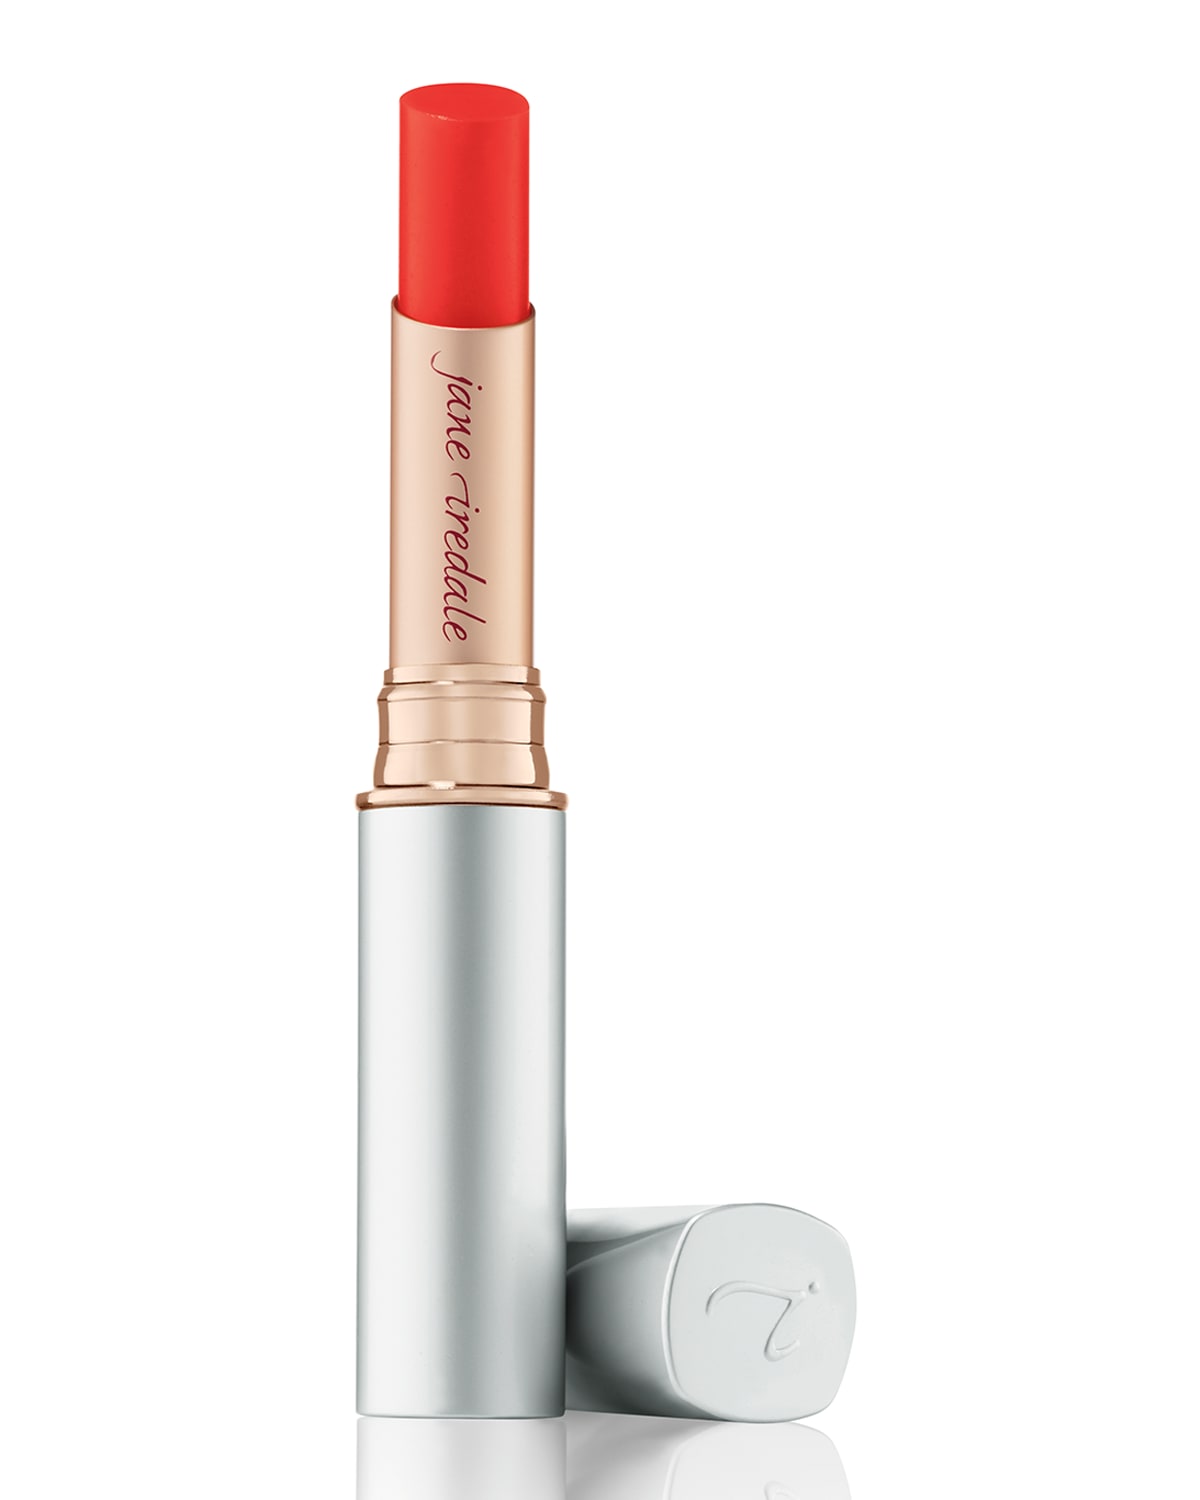 Jane Iredale Just Kissed Lip and Cheek Stain, 0.1 oz.